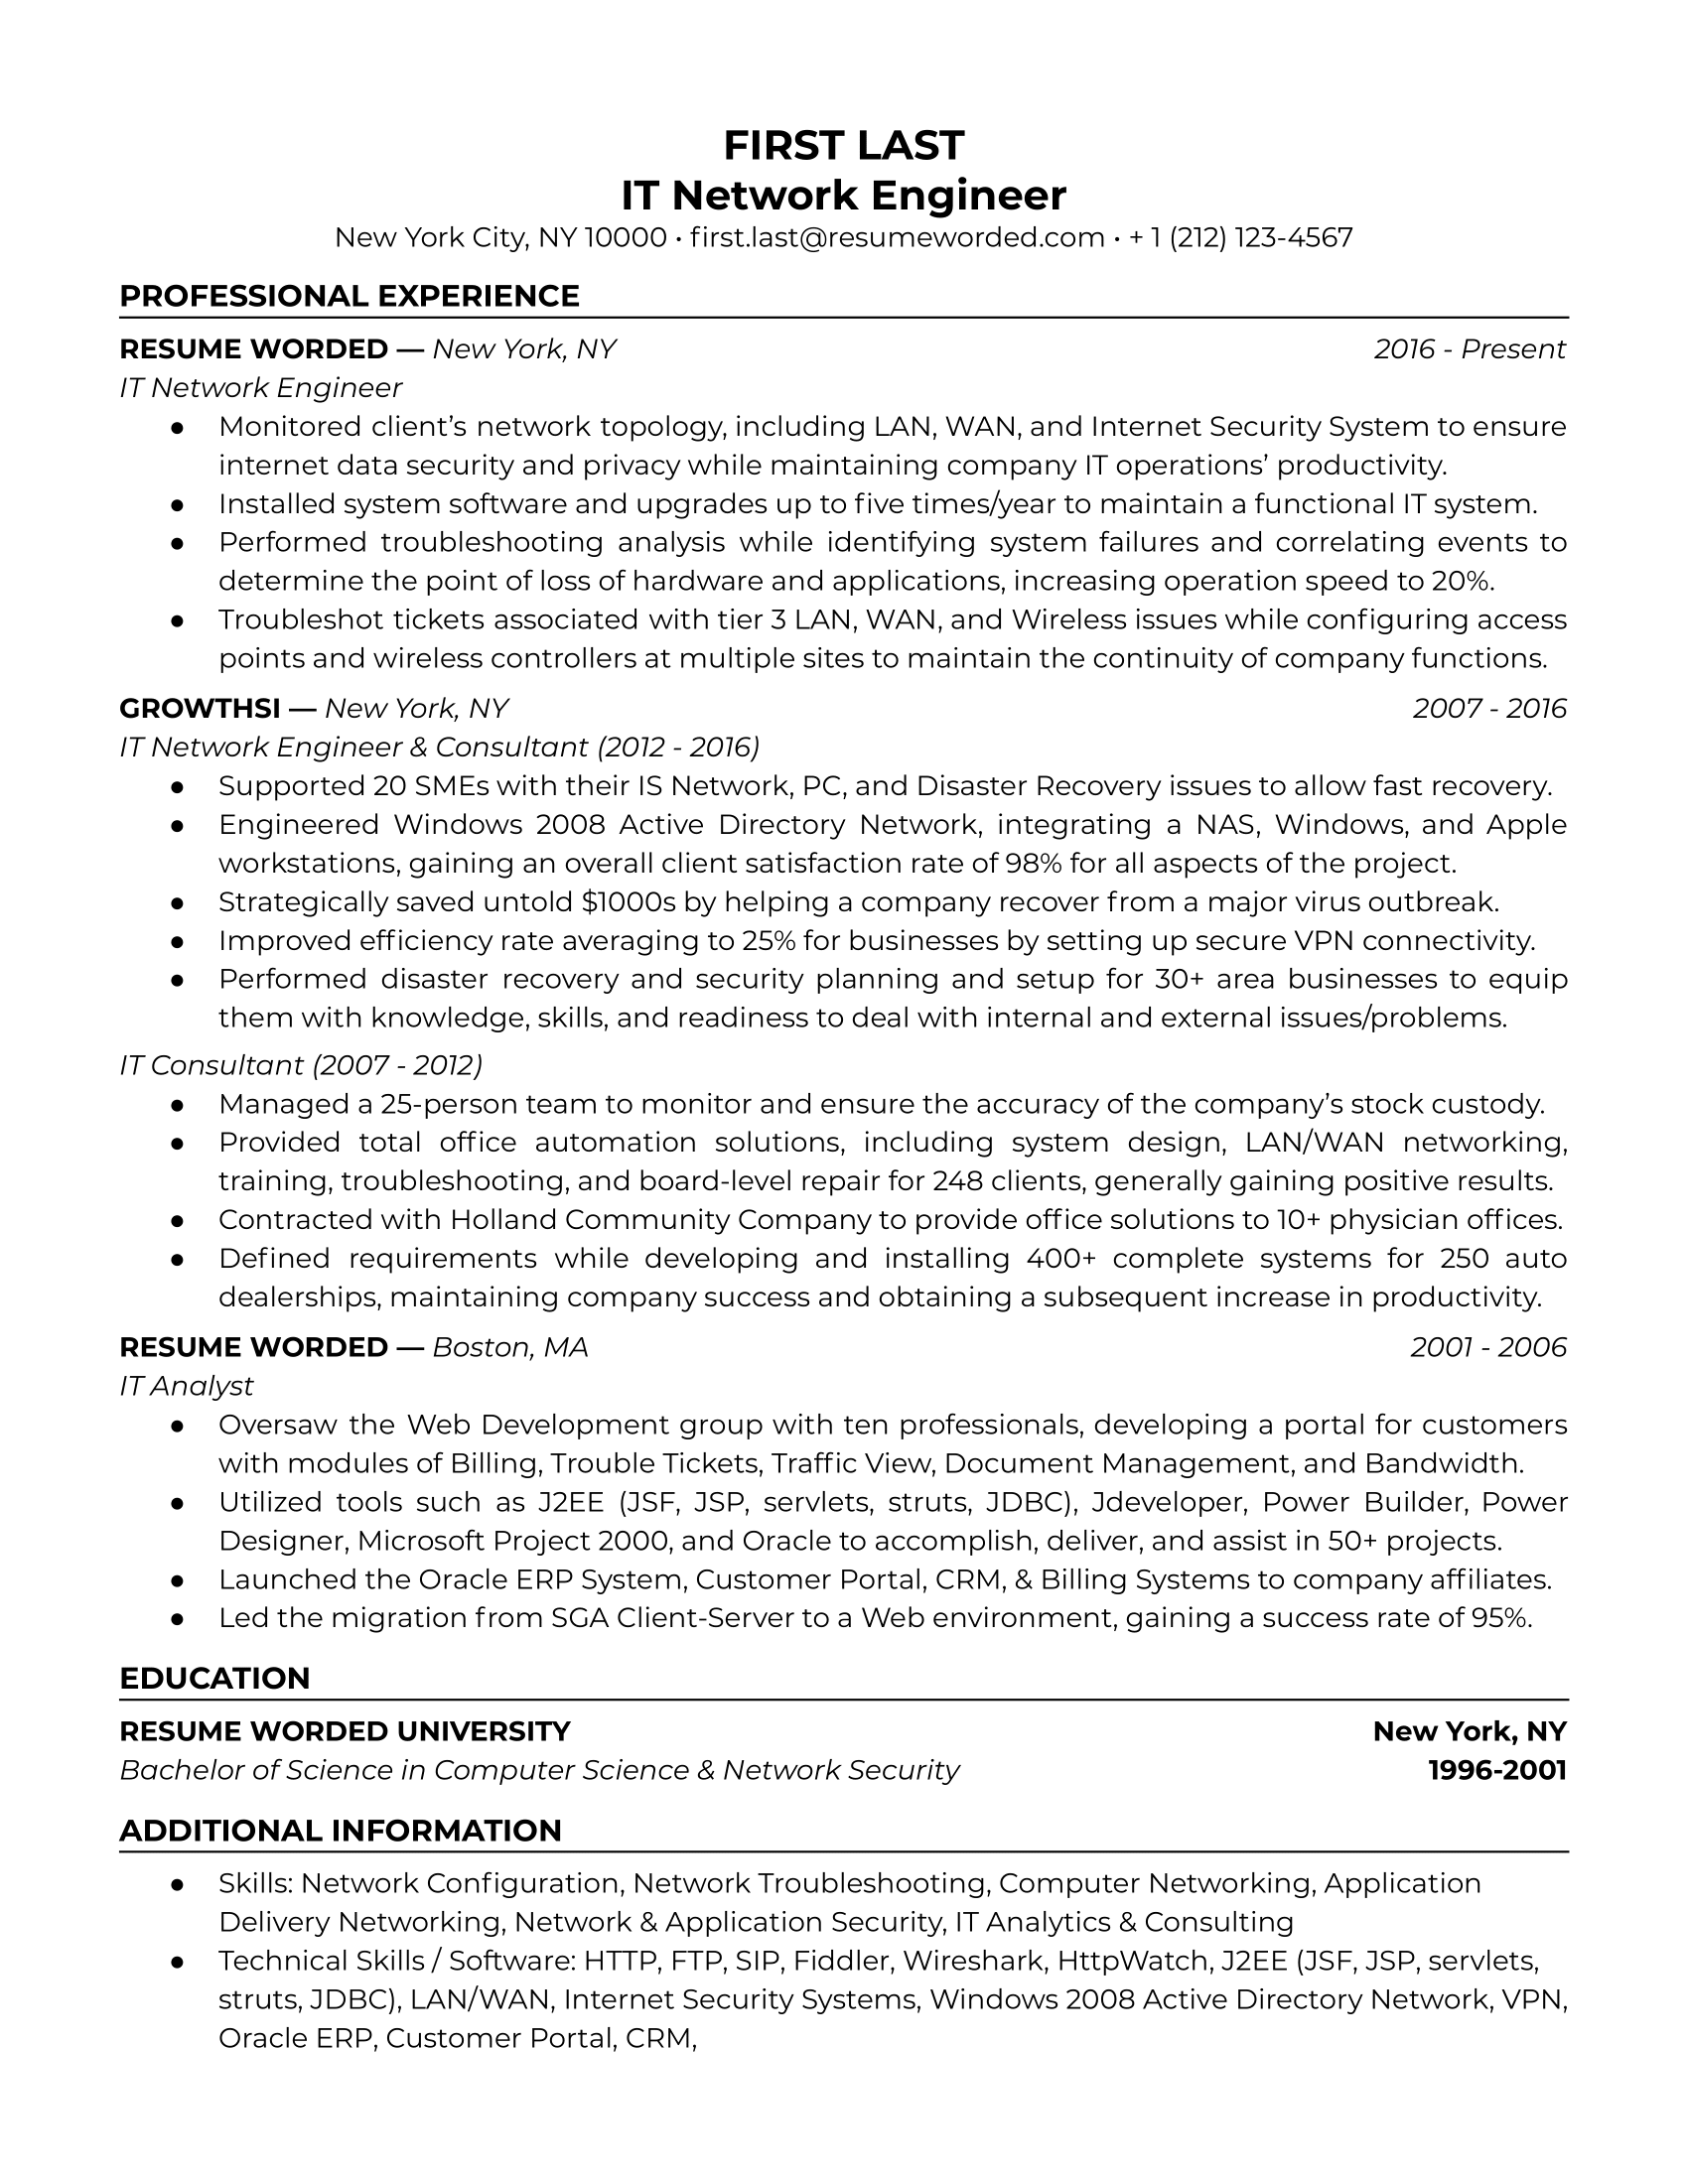 An engaging CV of an IT Network Engineer detailing technical and soft skills.